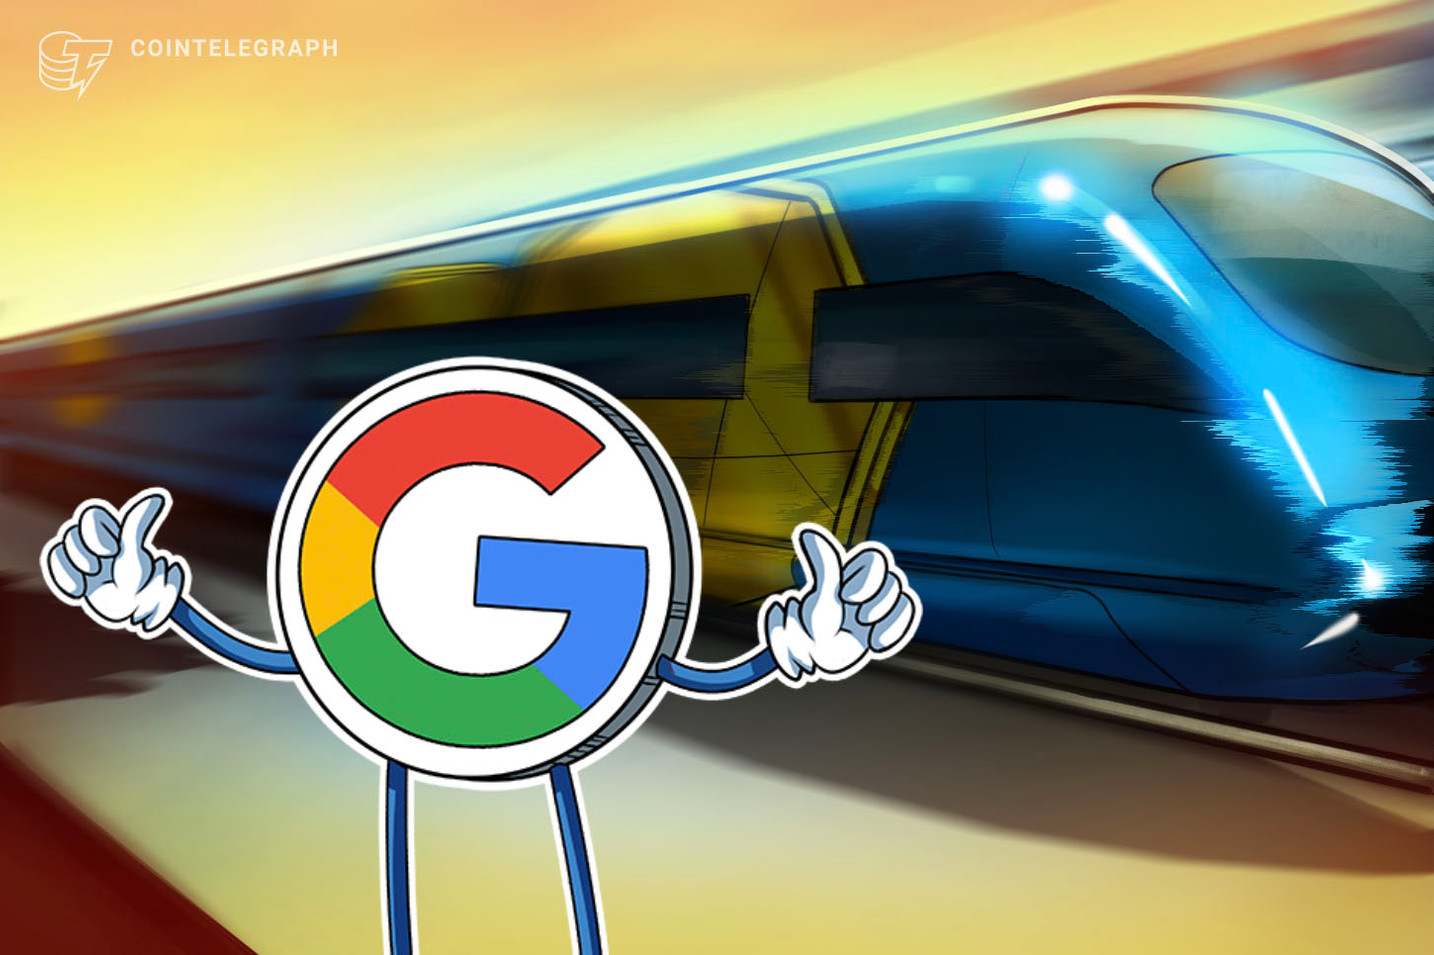 Google Finance Adds Dedicated 'Crypto' Tab Featuring Bitcoin, Ethereum, Litecoin